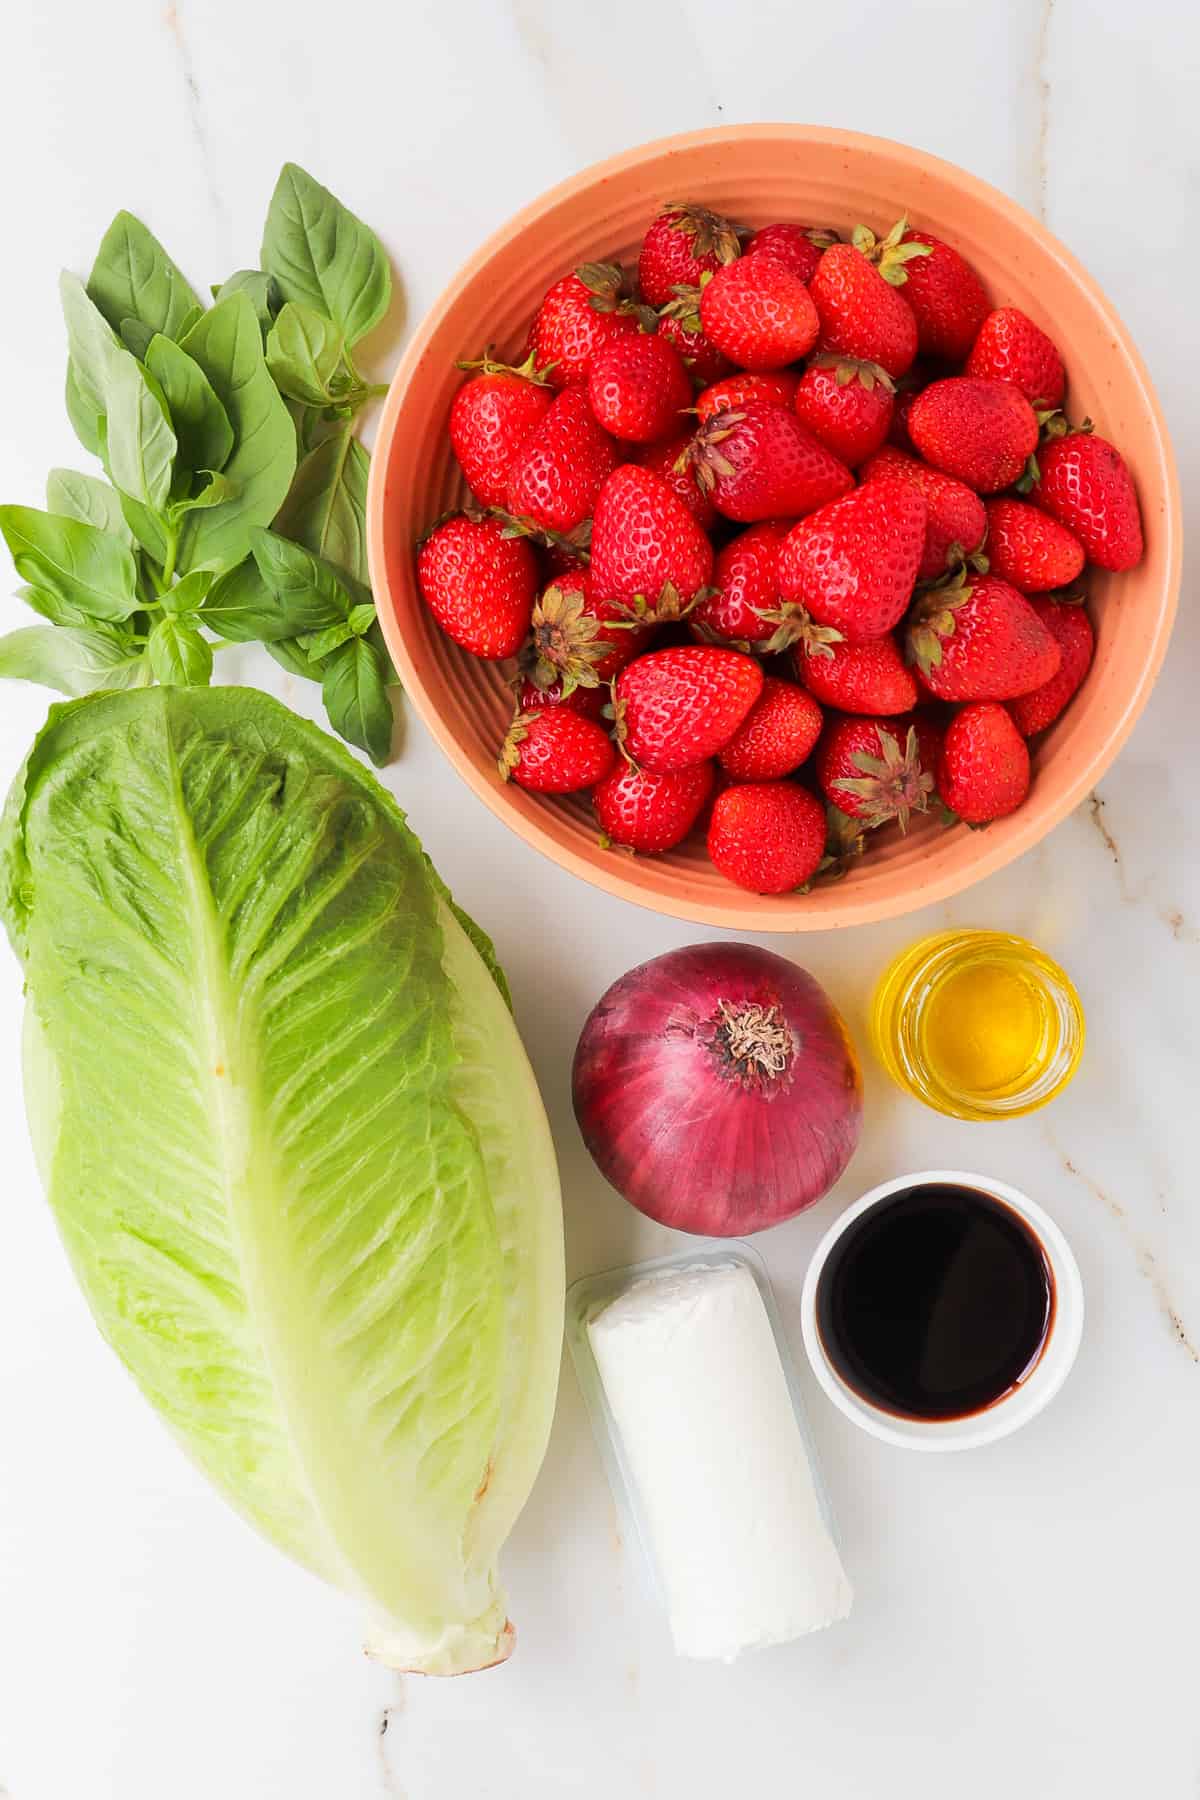 Ingredients shown to make the strawberry goat cheese salad.